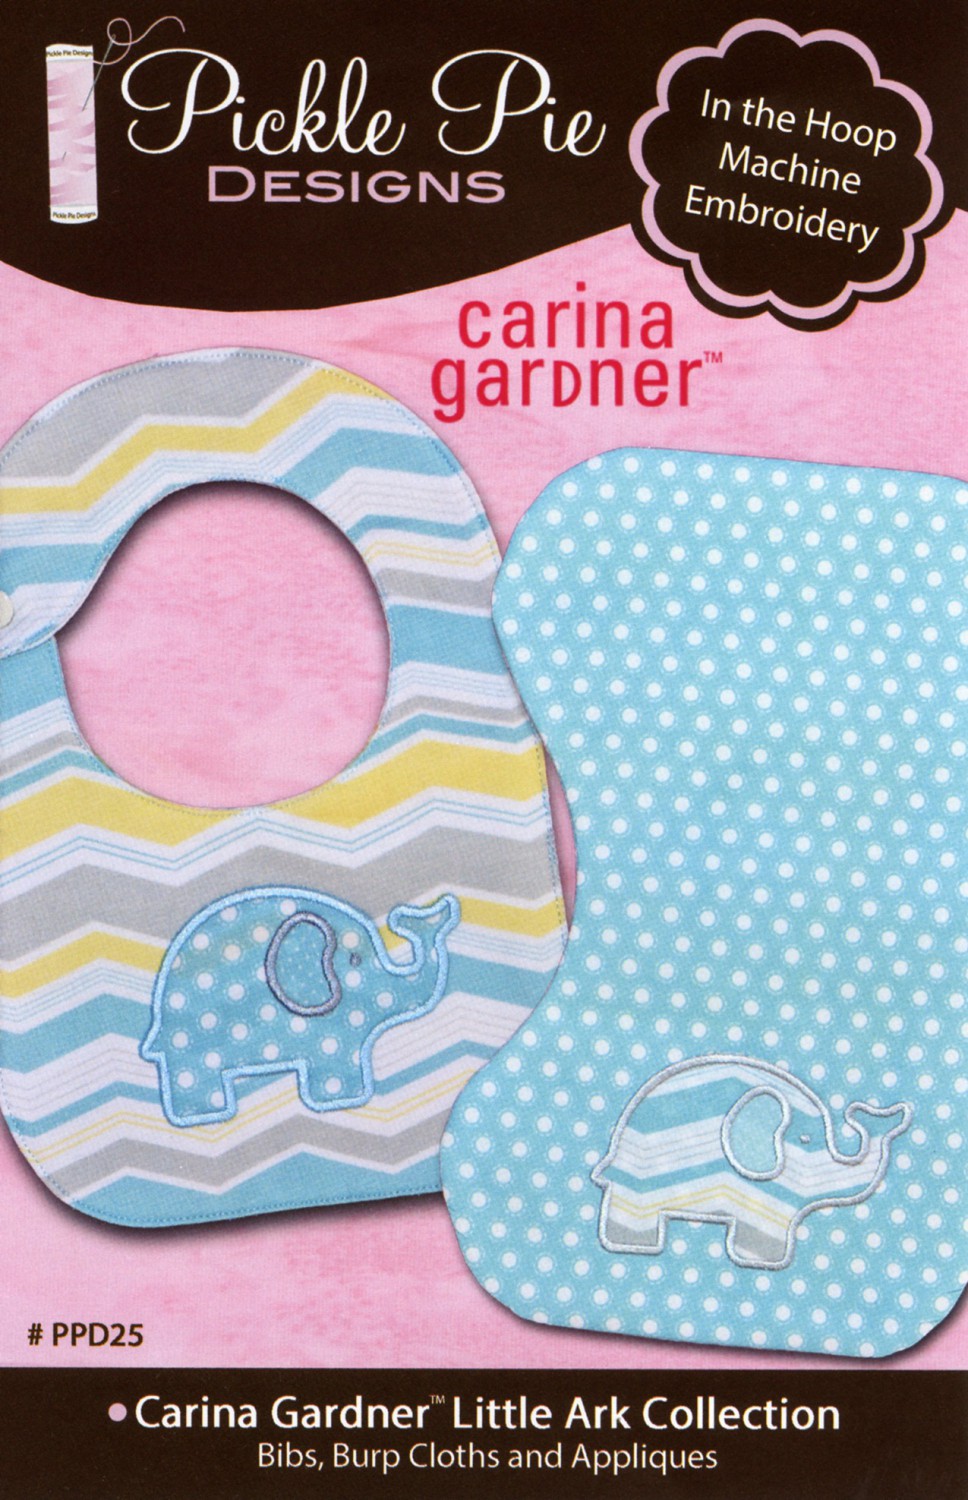 Carina Gardner Little Ark Collection Embroidery Designs on CD-ROM by Pickle Pie Designs